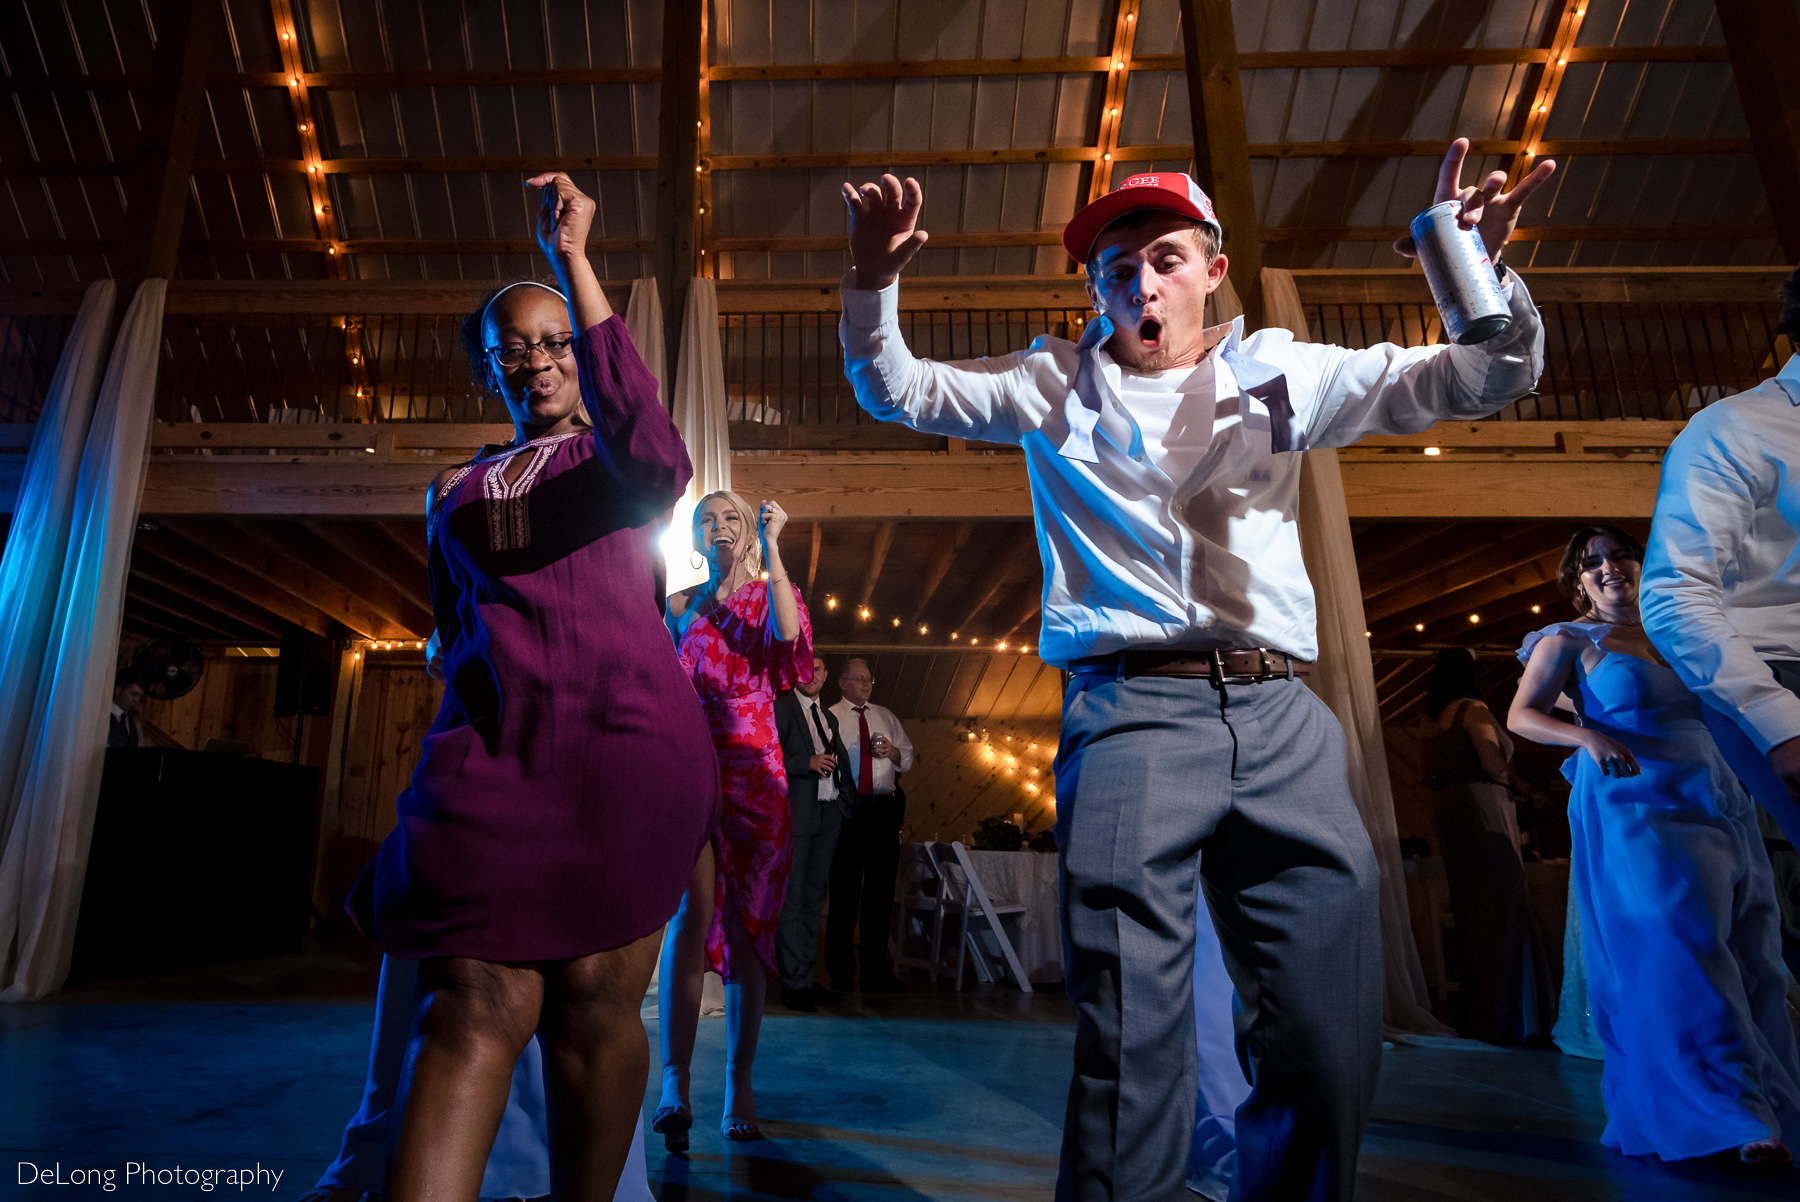 Fun low perspective dancing image during wedding reception at Lady Bird Farms by Charlotte Wedding Photographers DeLong Photography